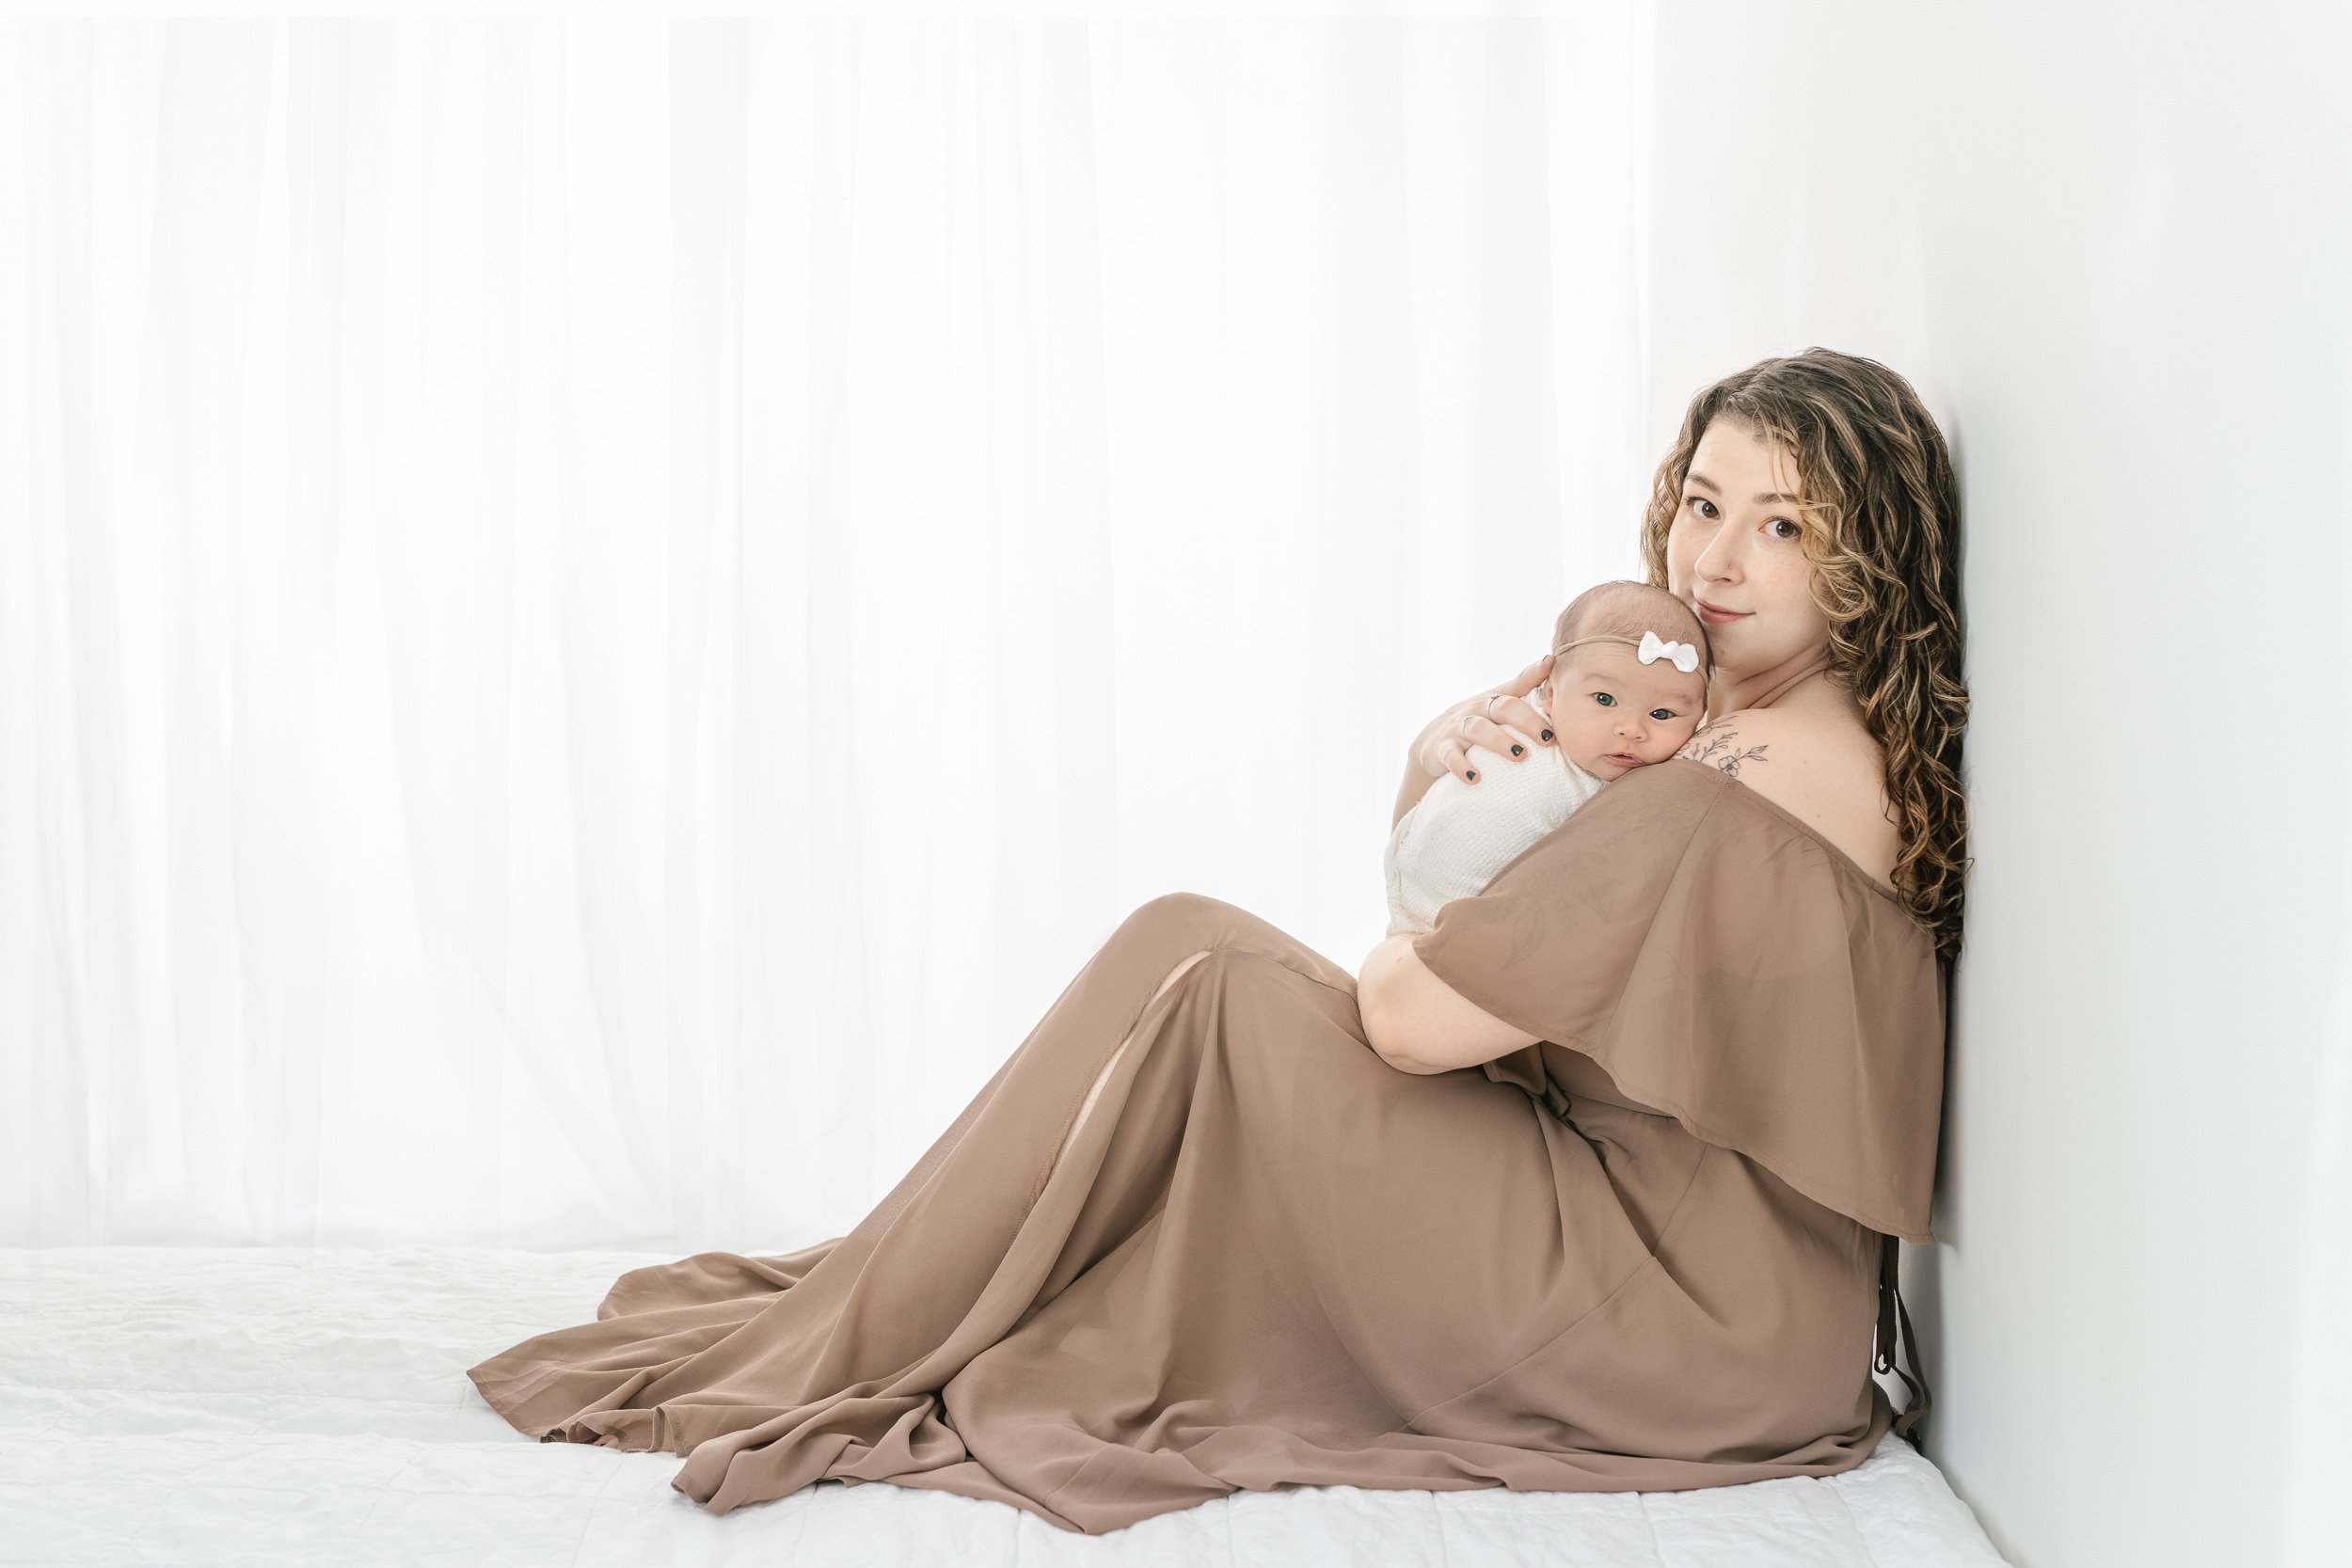  A bright-eyed baby girl snuggles her mother in a studio in New Jersey by Nicole Hawkins Photography. baby snuggles eyes open baby portrait #NicoleHawkinsPhotography #studionewbornportraits #NJstudiophotographer #NJnewborns #NicoleHawkinsNewborns 